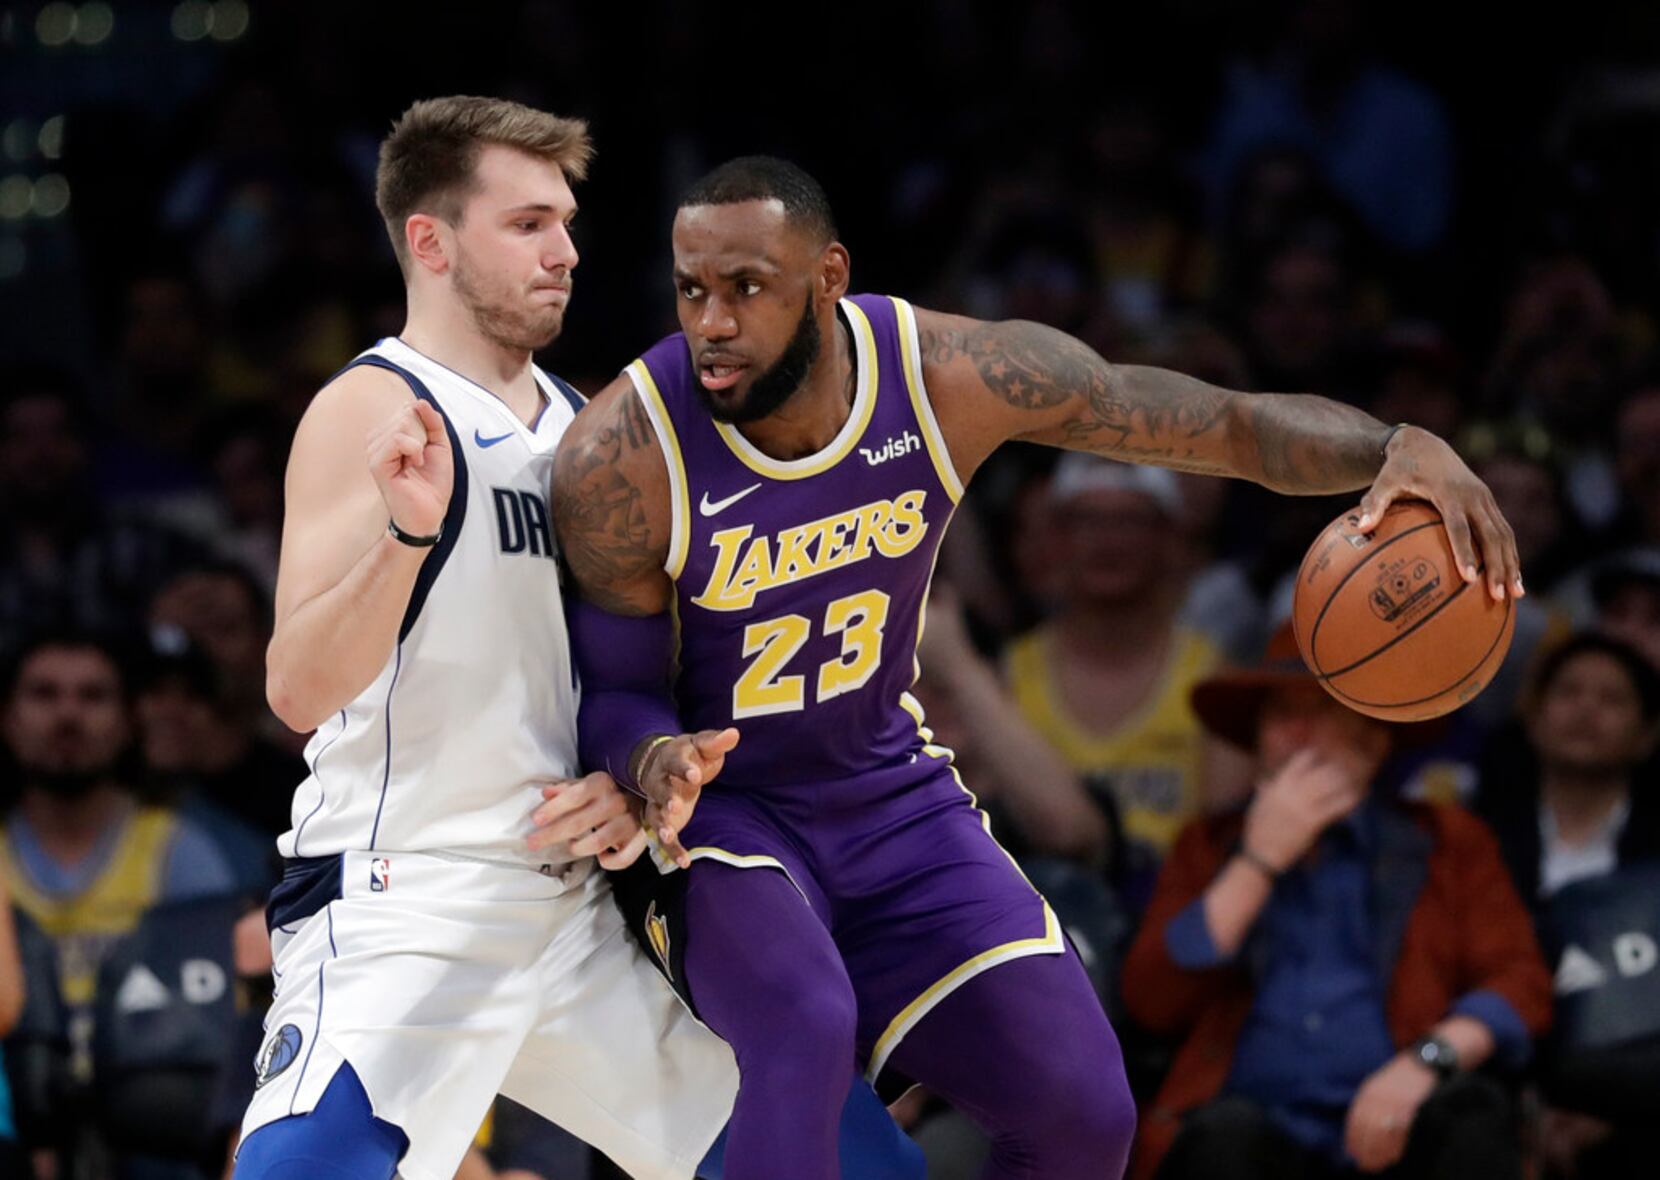 LUKA DONCIC ABOUT HIS CHRISTMAS DAY COW BOY COSTUME & PLAYING AGIANST  LEBRON & LAKERS 